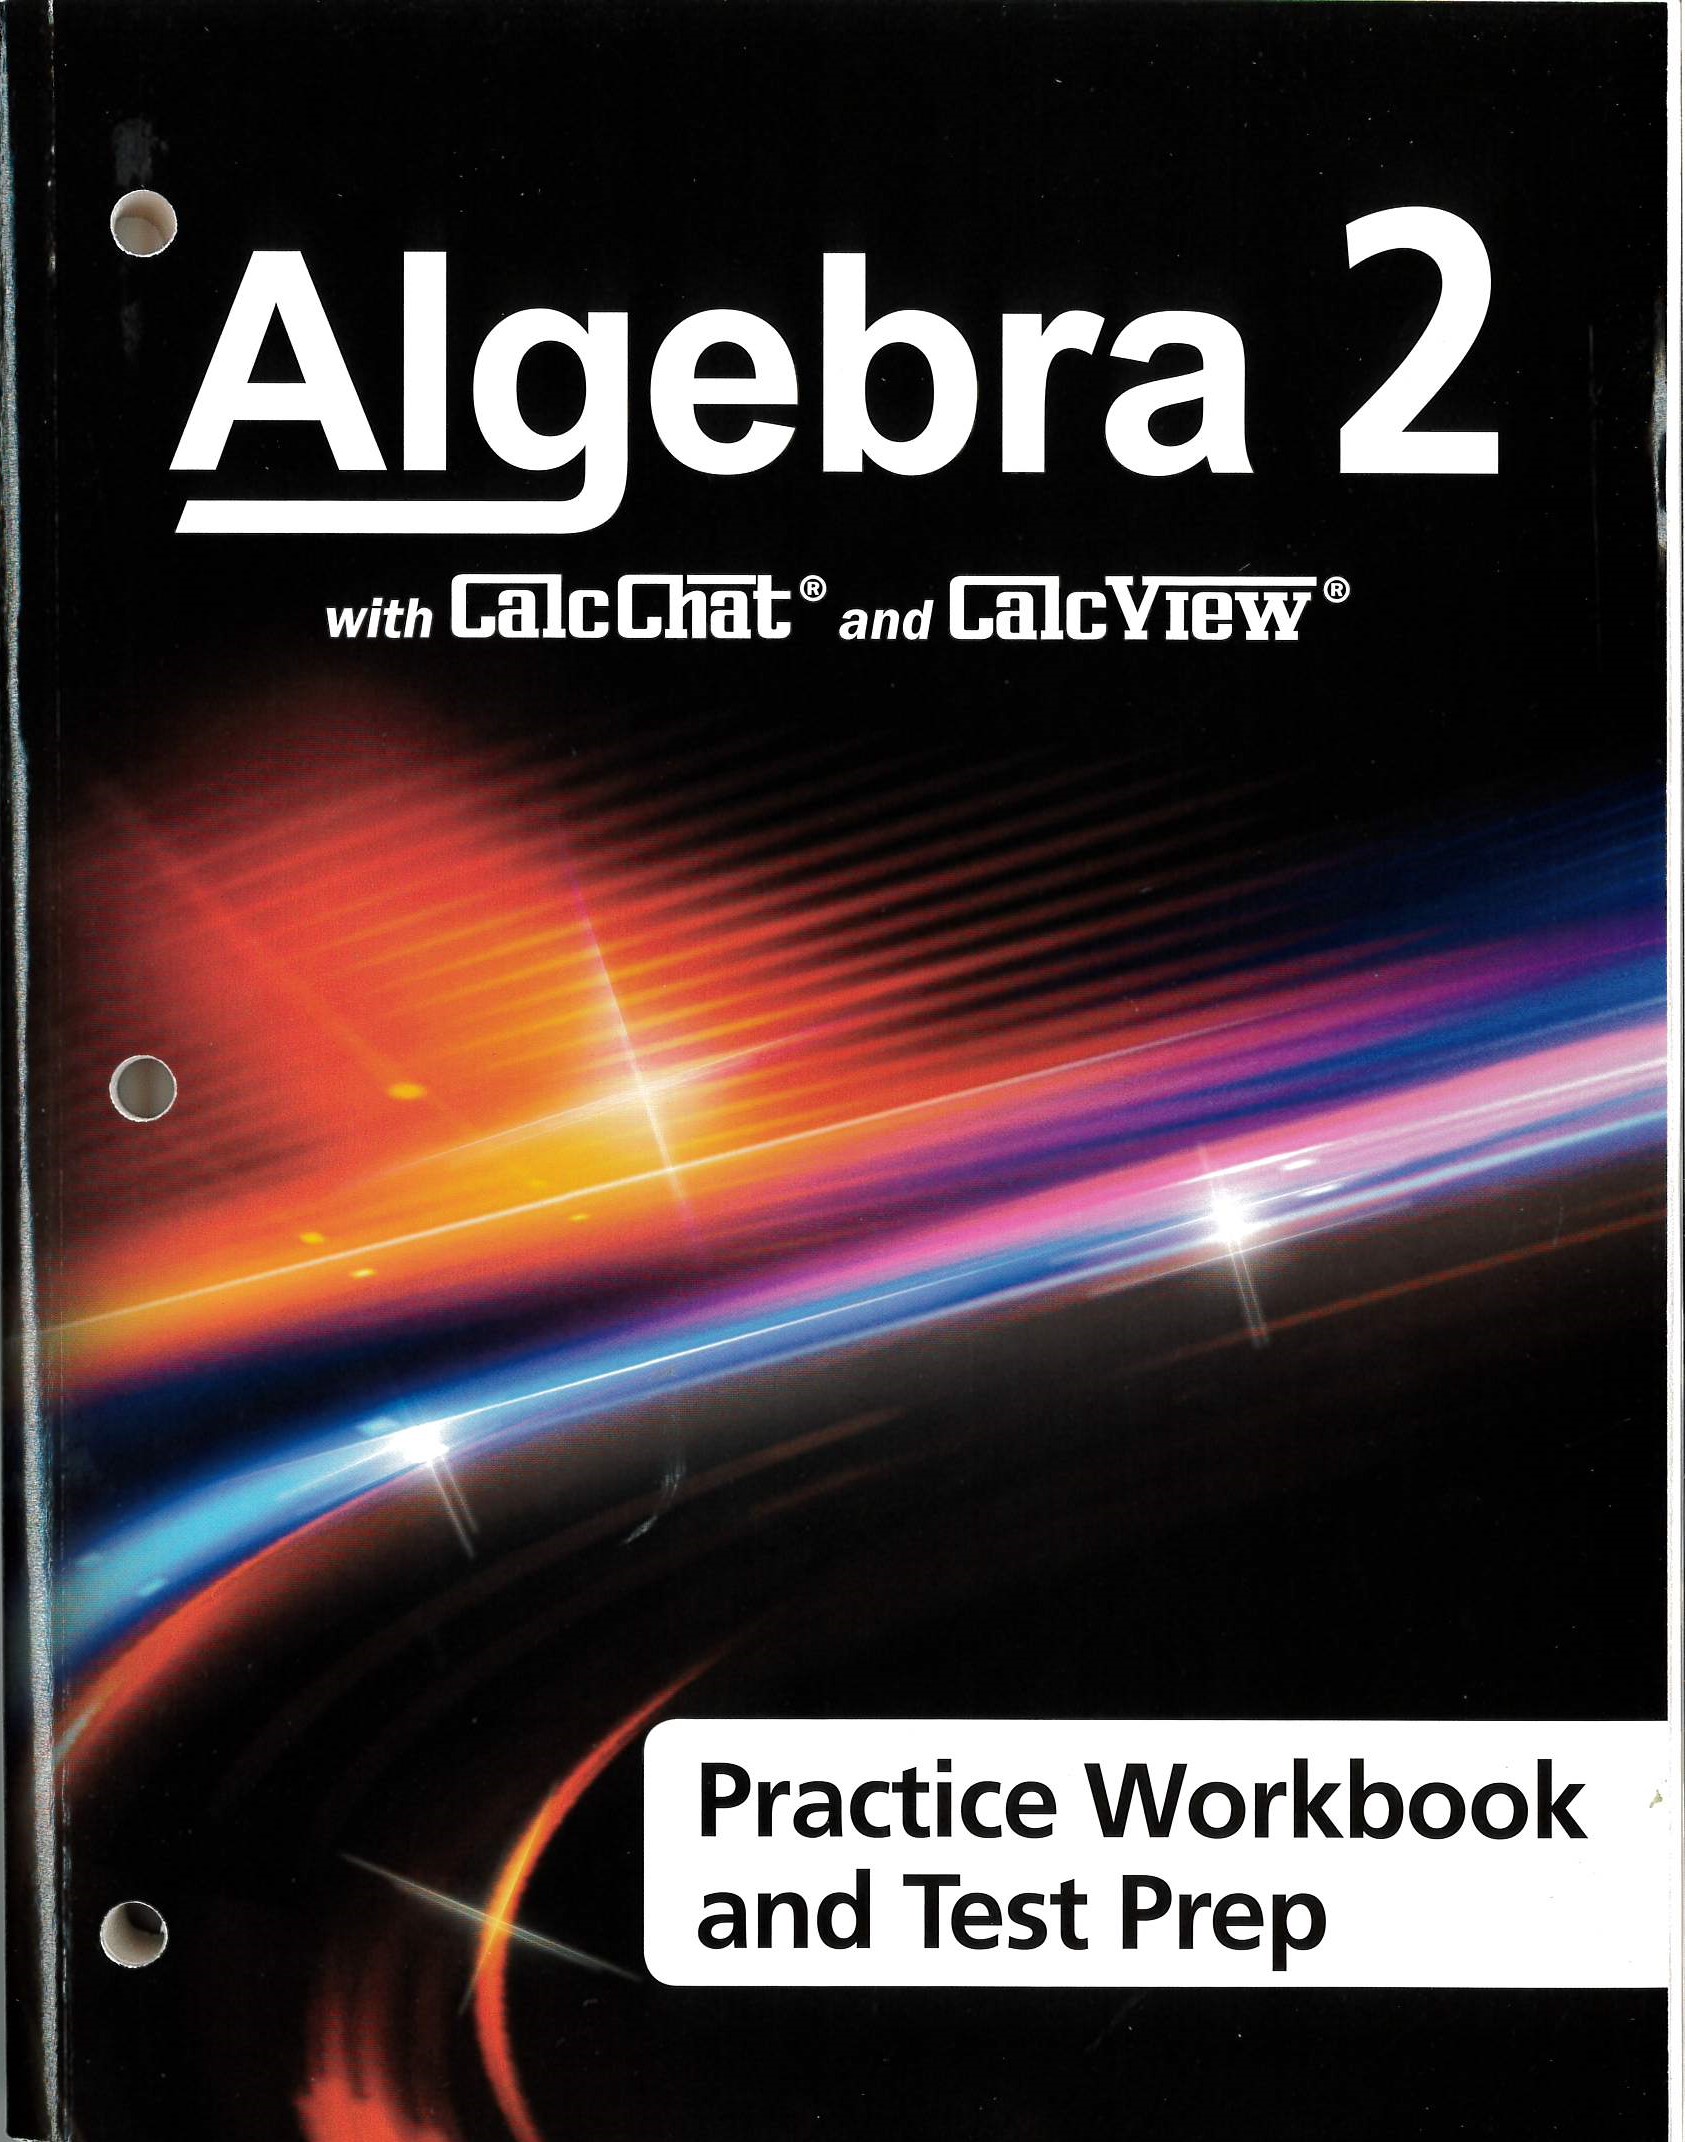 Algebra 2 (Practice workbook and test prep) : with CalcChat and CalcView